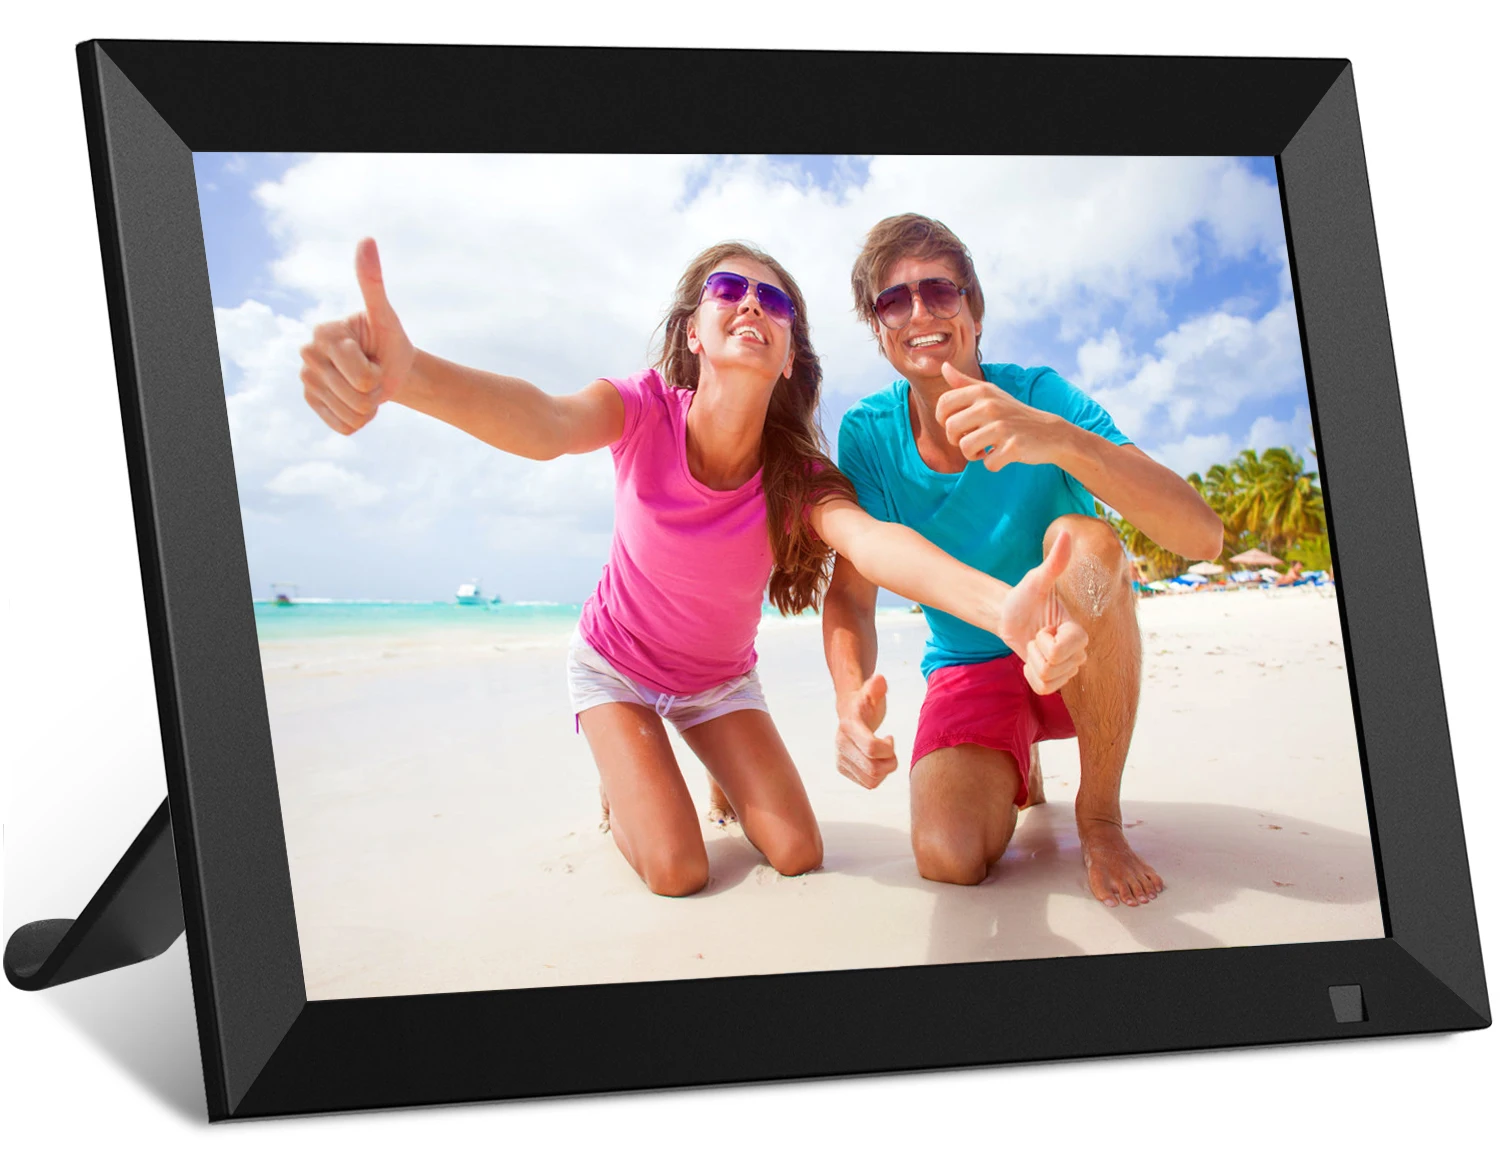 

WiFi Digital Picture Frame 10.1 inch IPS Touch Screen HD Display 1920x1200 16GB Storage Auto-Rotate Share Pictures via App